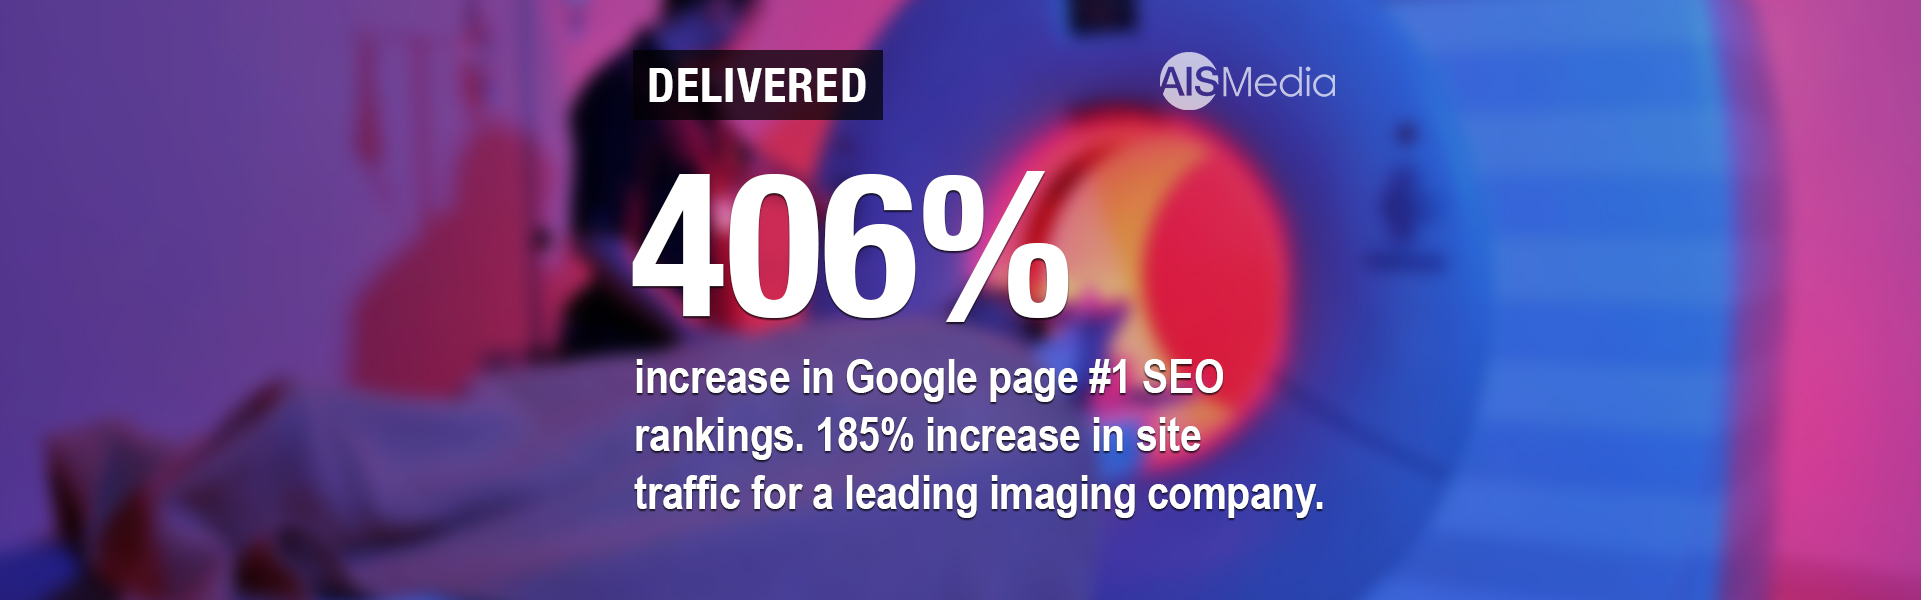 AIS Media delivers 406% increase in Google page #1 SEO rankings for leading imaging company.